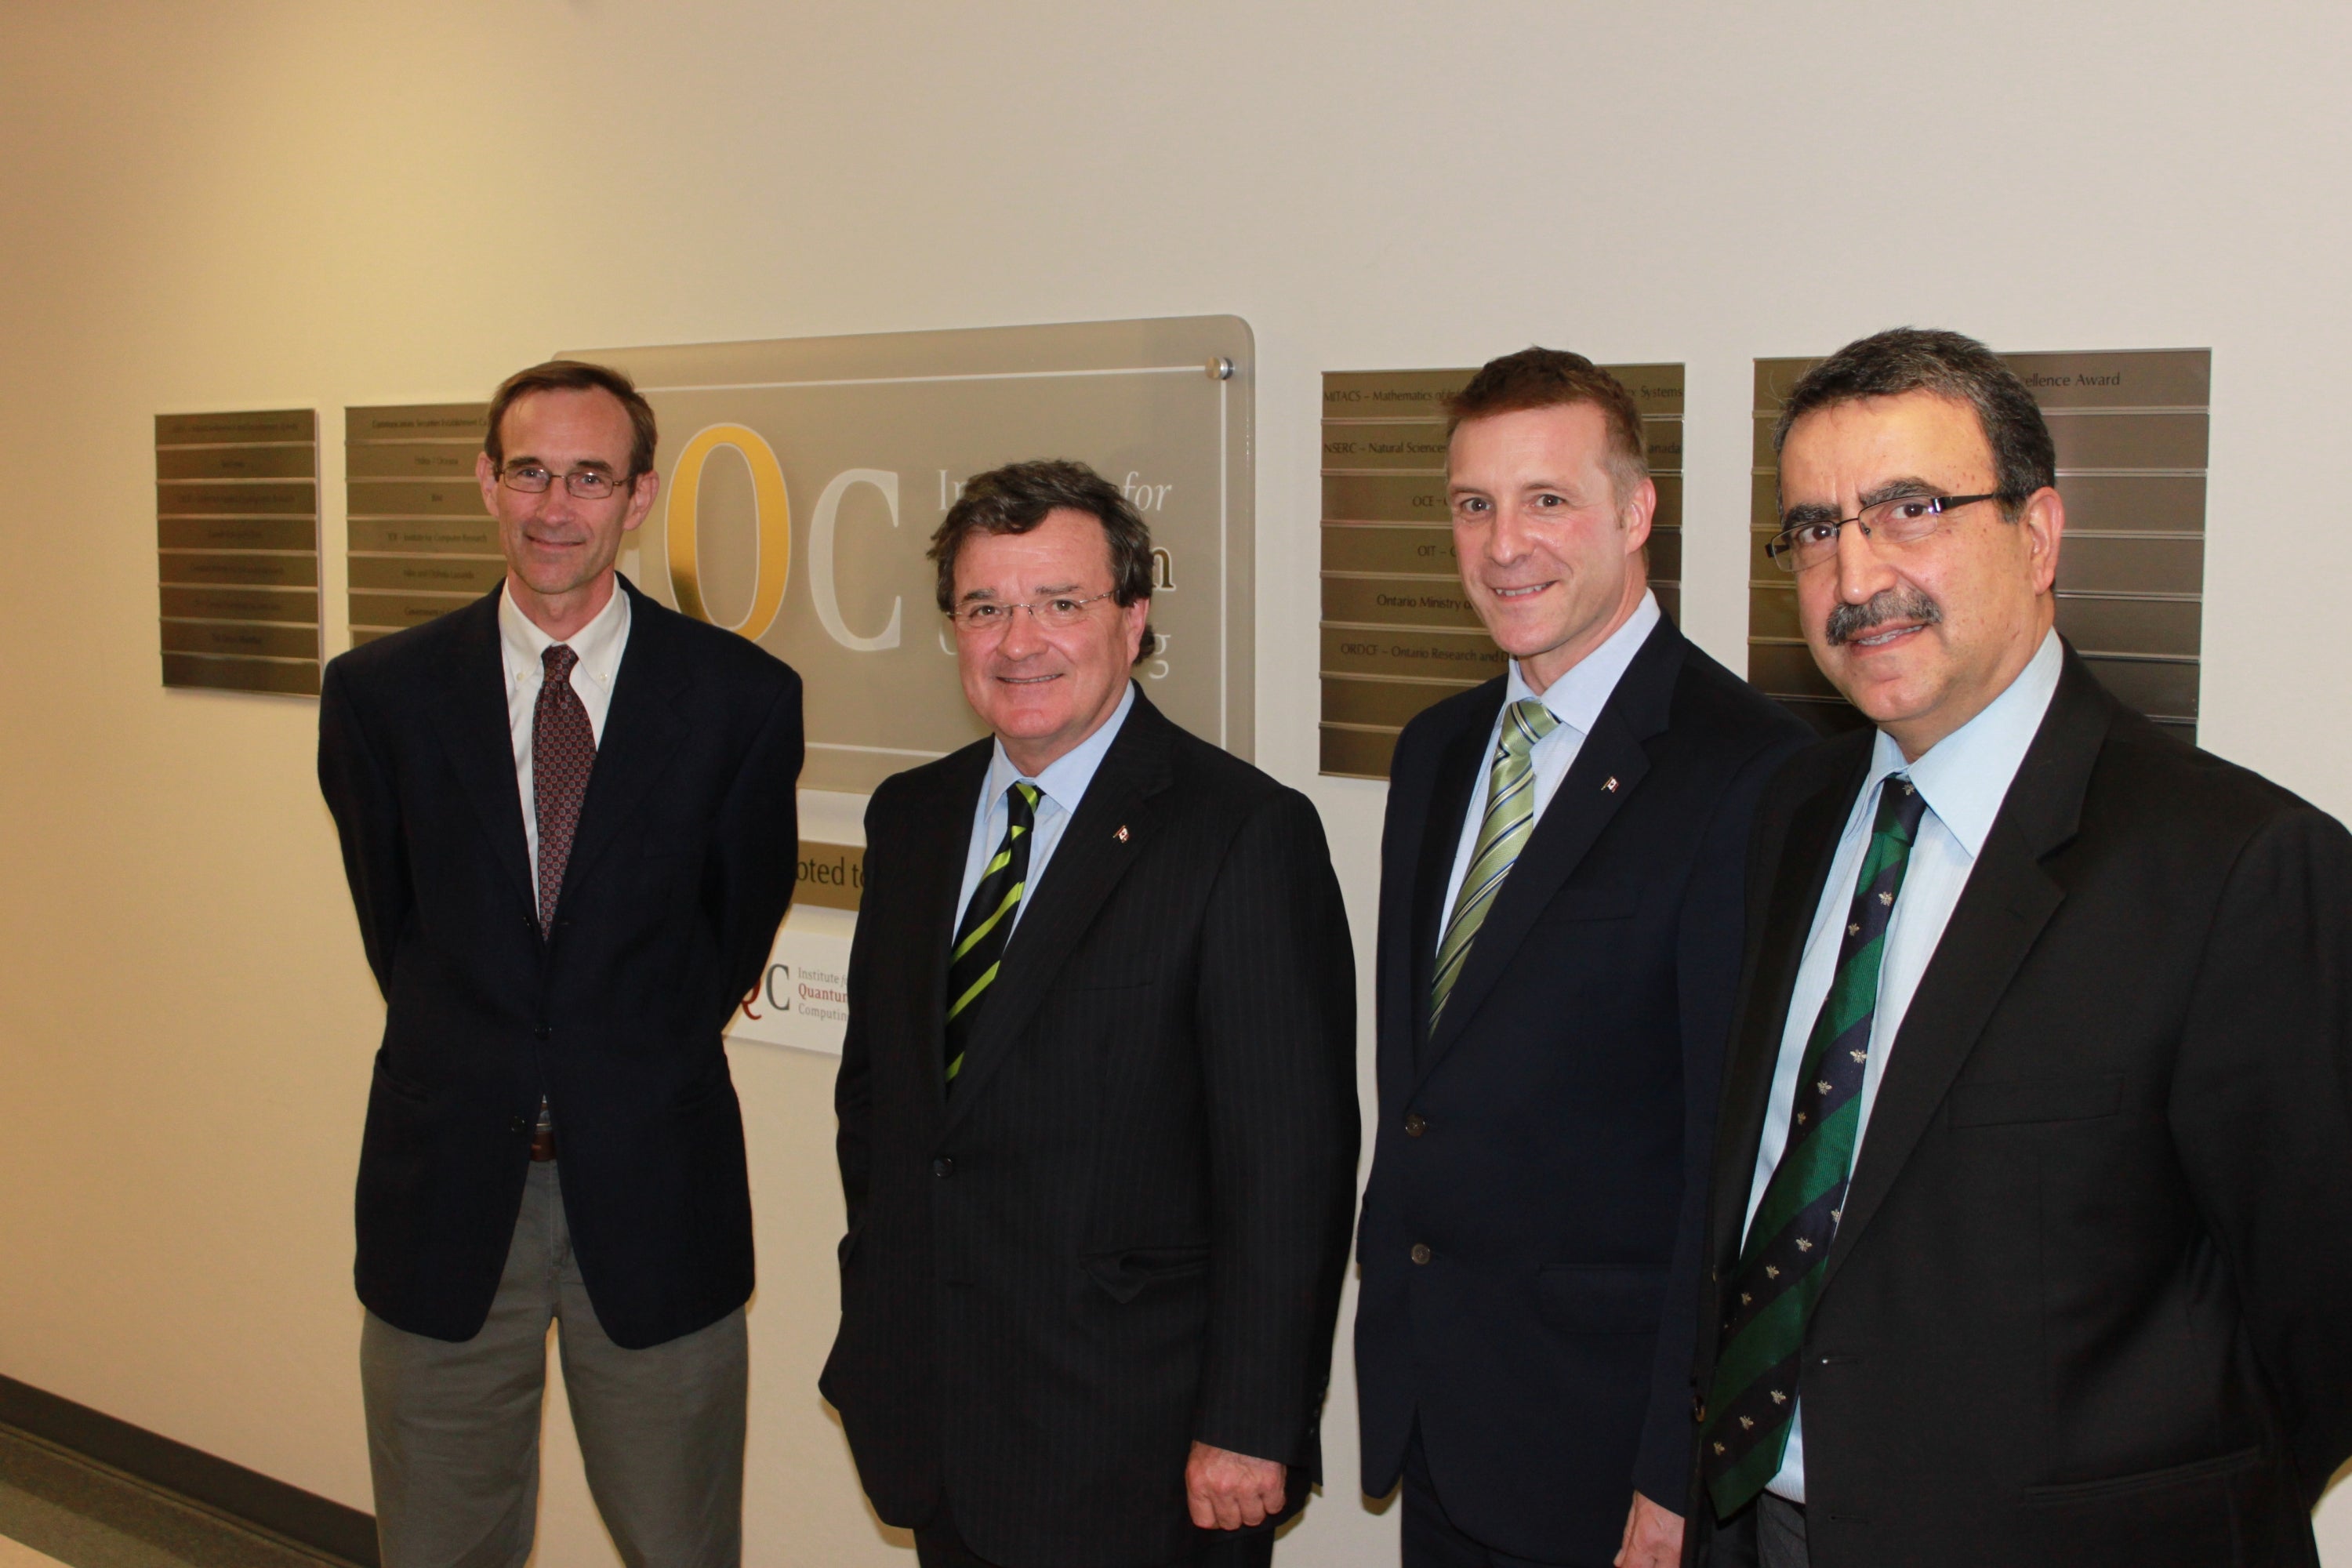 Jim Flaherty standing next to members of the IQC and the President of Waterloo